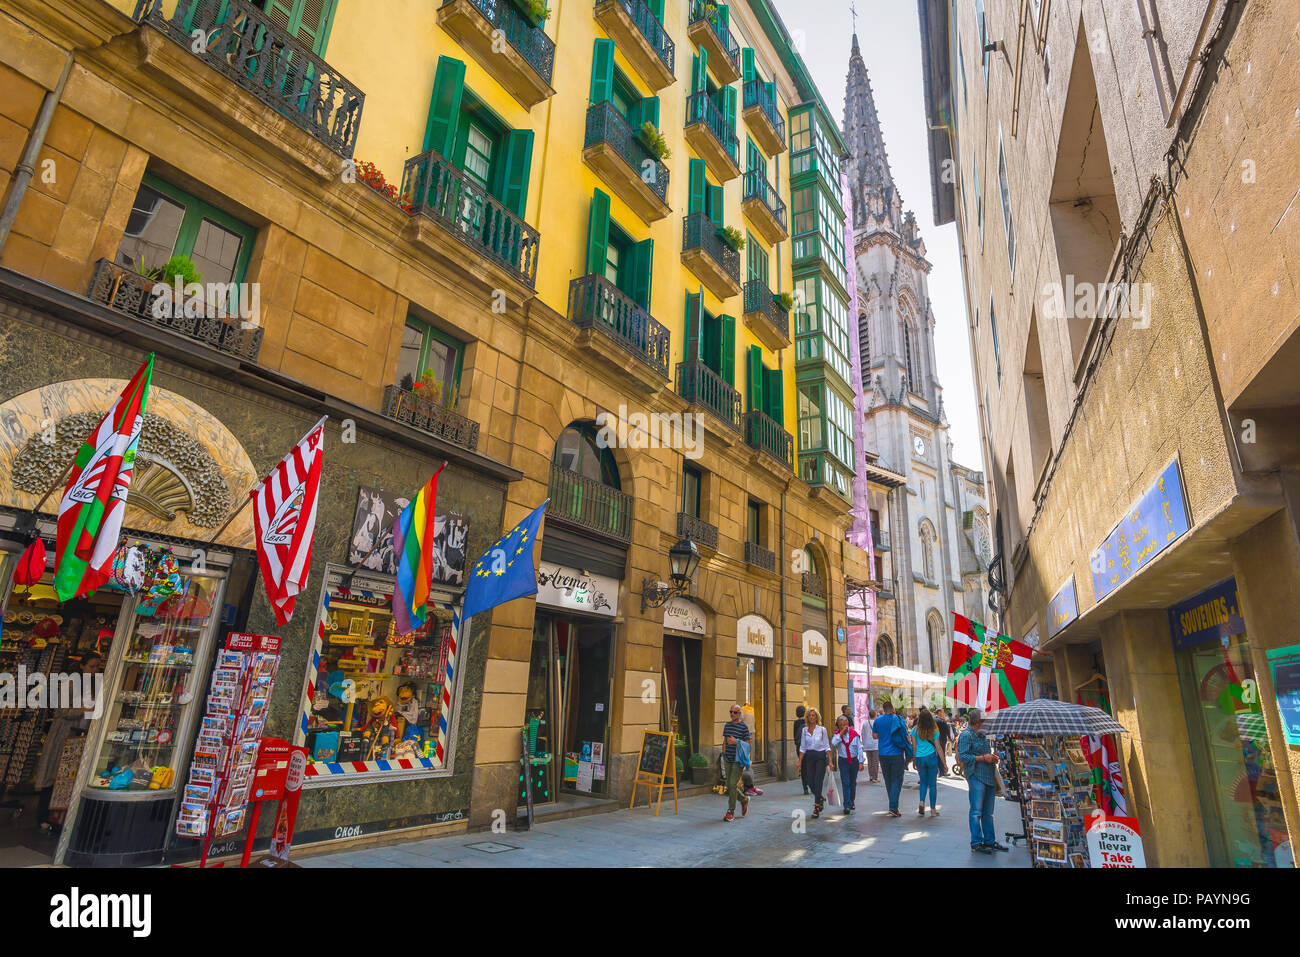 Bilbao street, view along a street towards the Catedral de Santiago in the center of the Casco Viejo (Old Town) area of Bilbao, Spain. Stock Photo